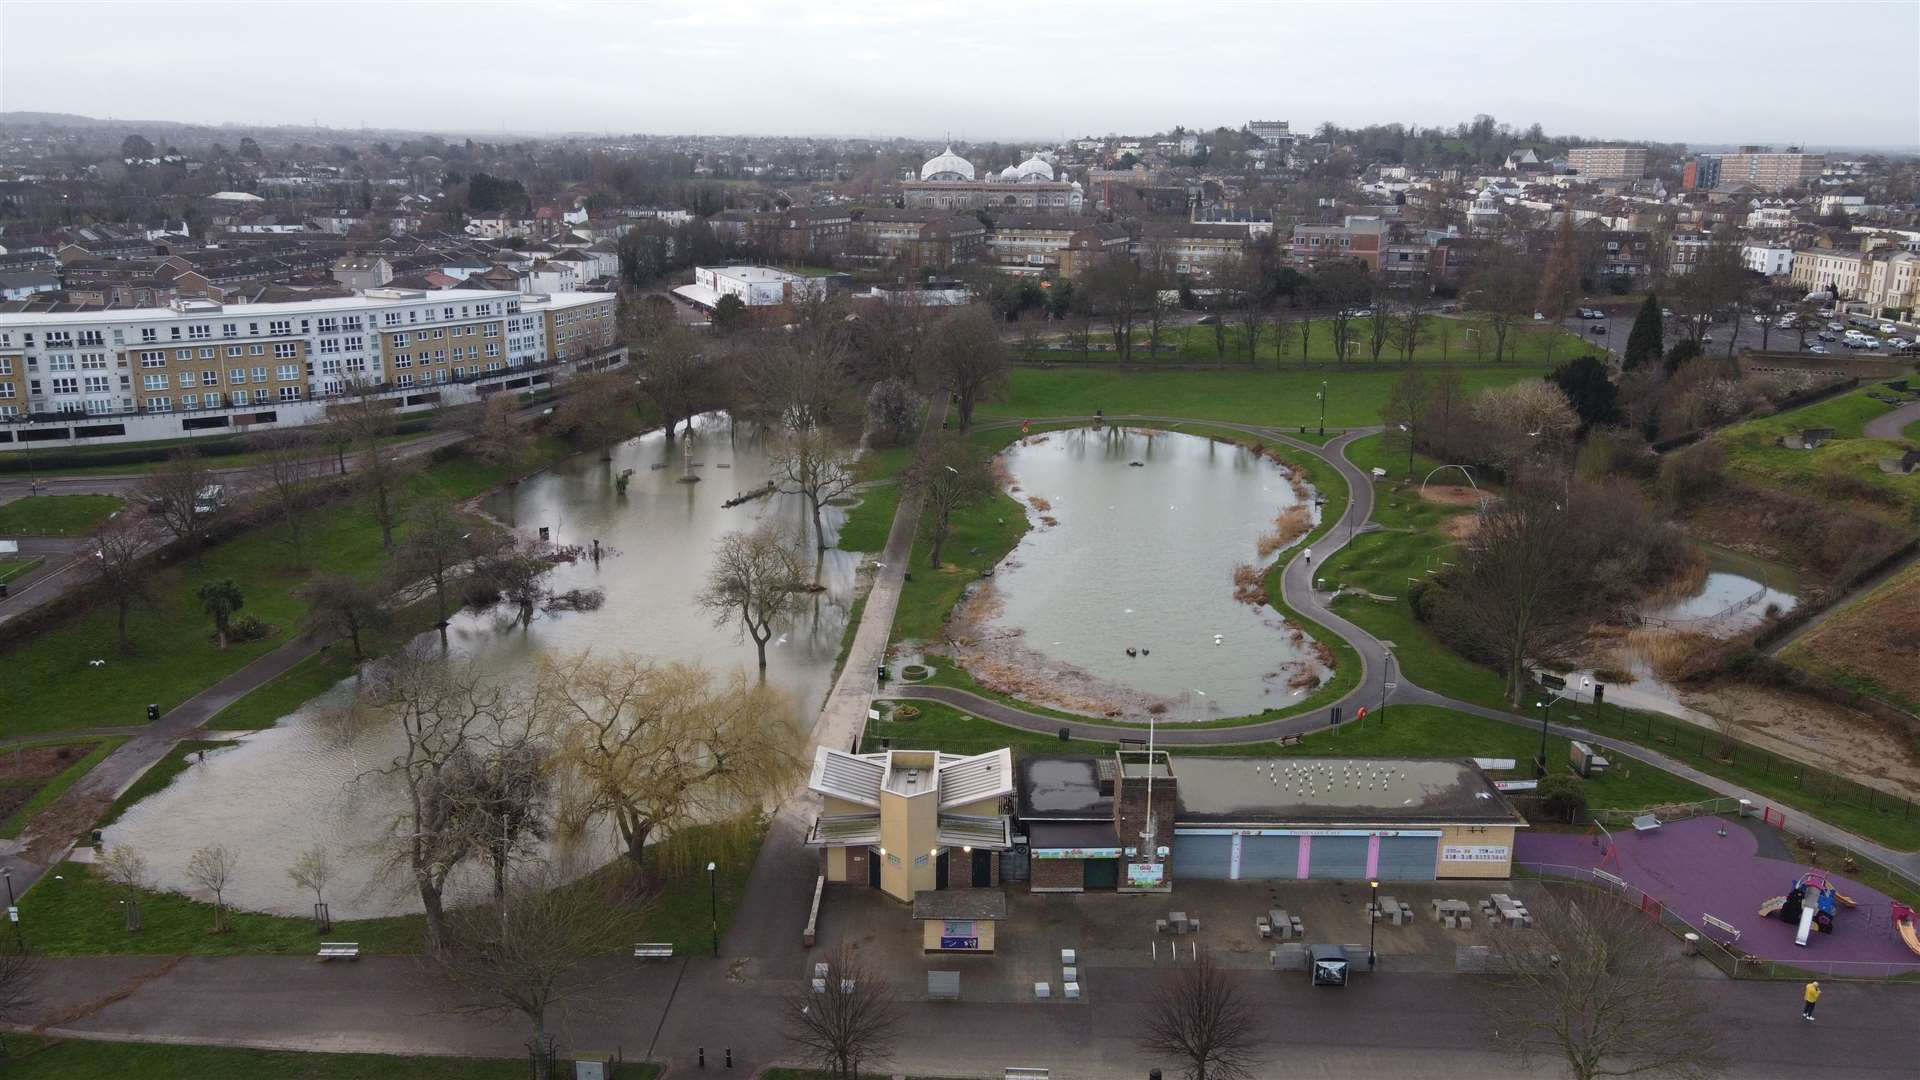 Flood alerts are in placer across Kent including Gravesend riverside, pictured, which has been badly affected. Photo Jason Arthur